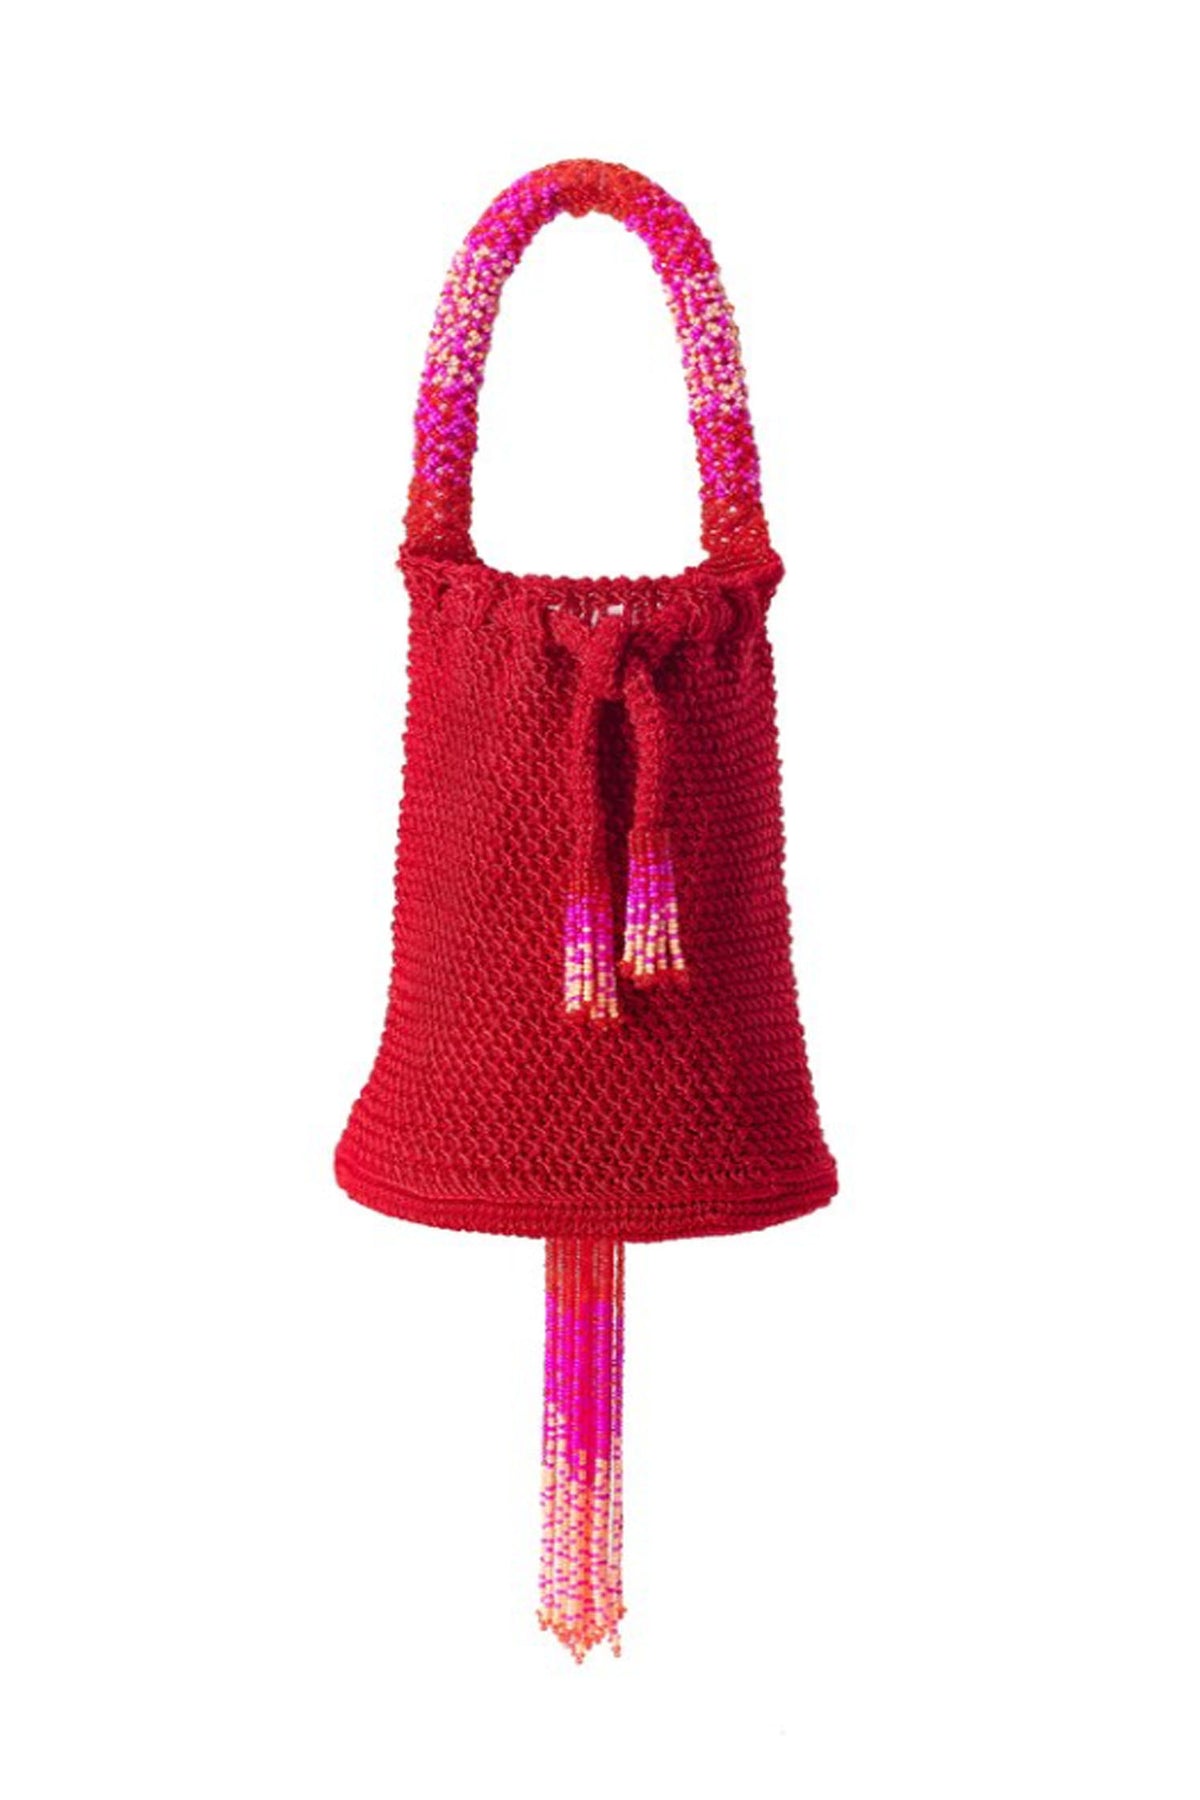 Red Crochet Party Bag